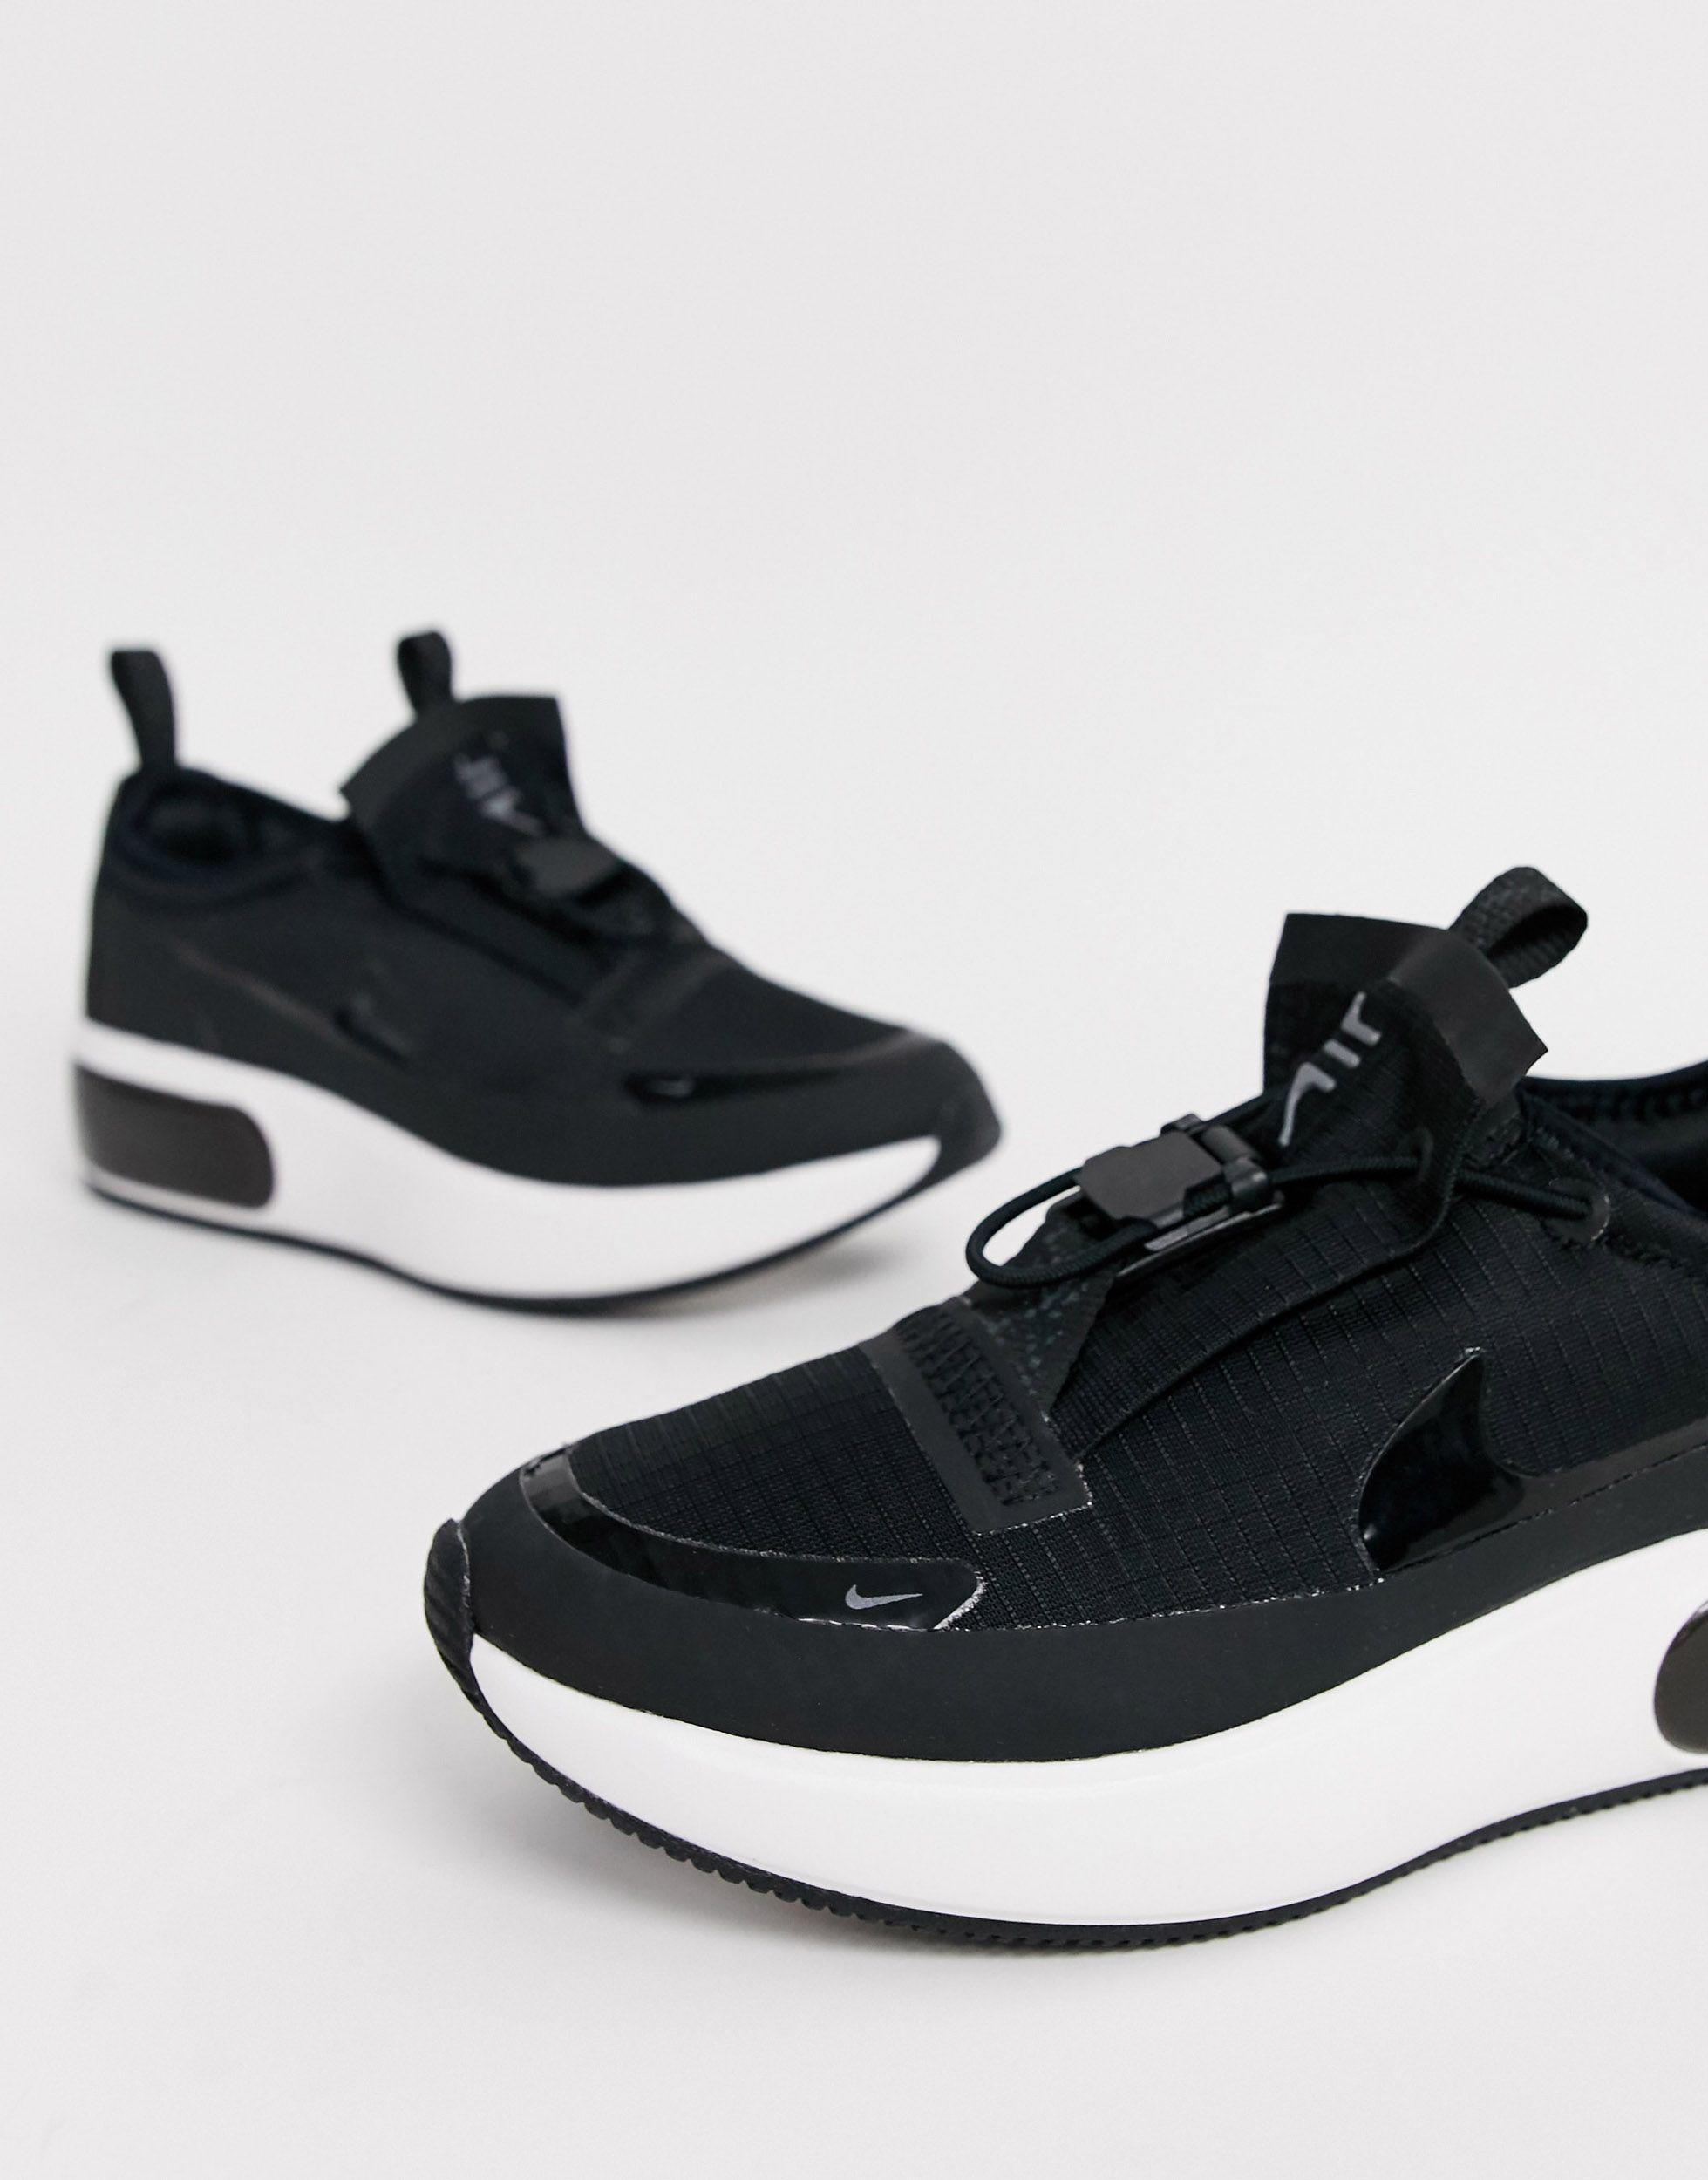 Nike Synthetic Air Max Dia Shoe (black) - Lyst